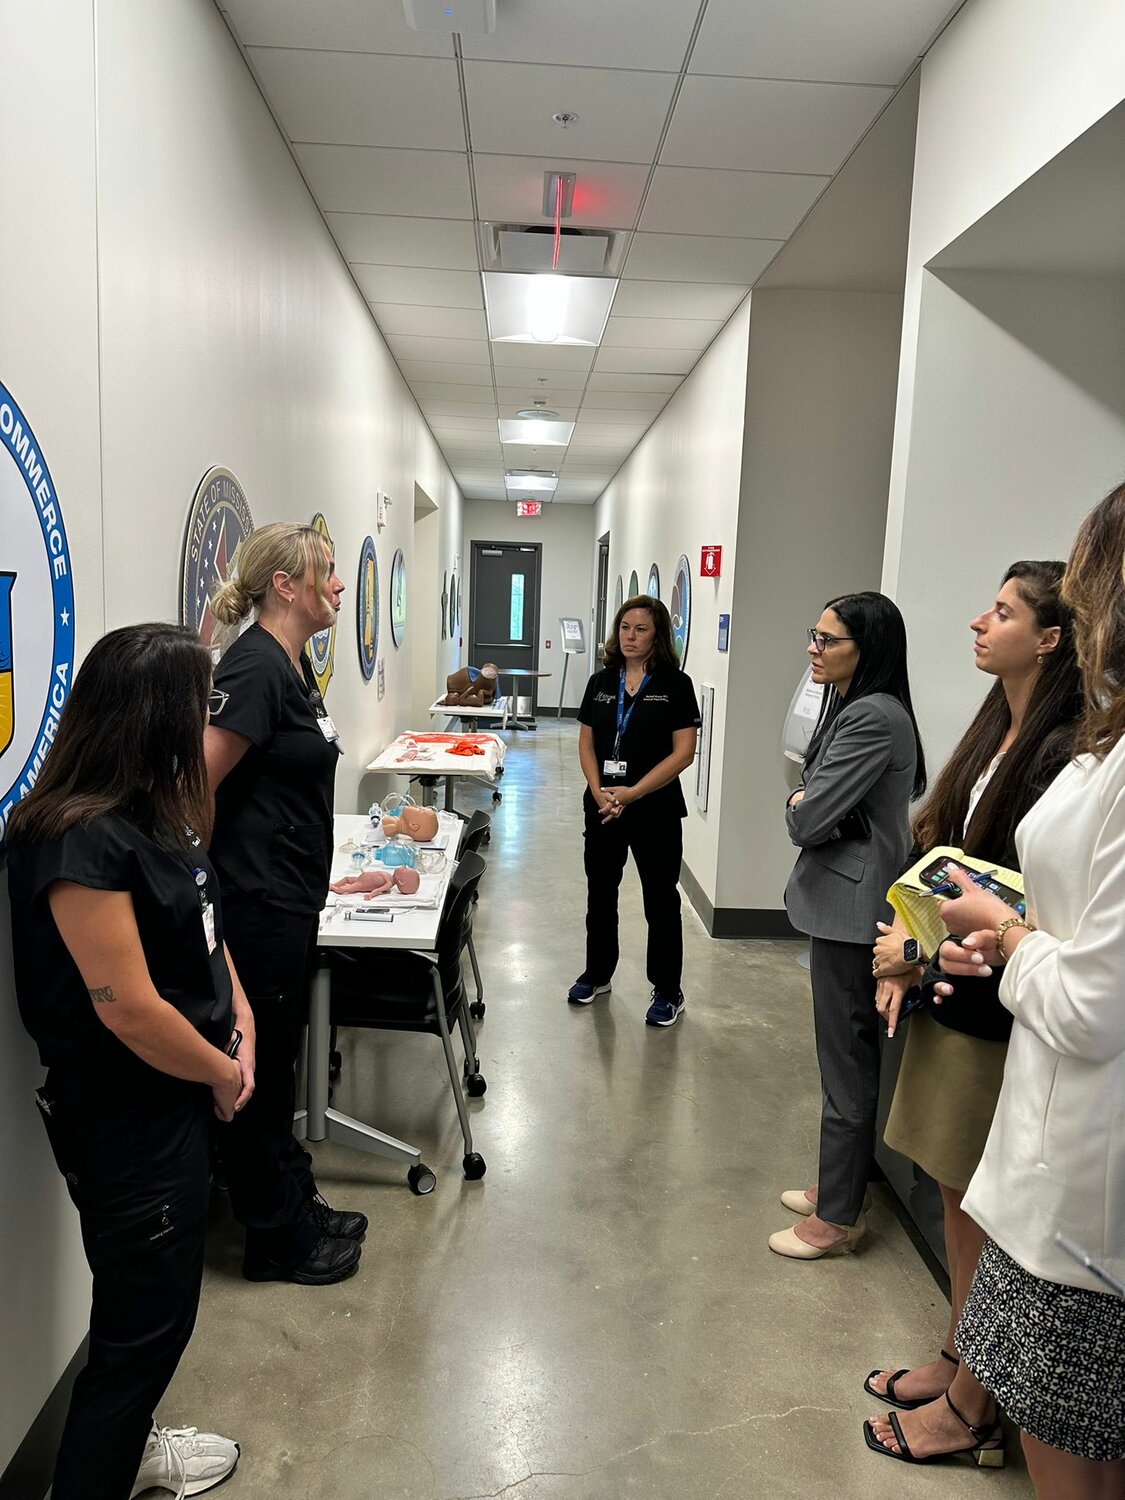 Consul General Anat Sultan-dadon (3rd from right) and Consulate staff receive a tour and briefing of the UMMC STORK training program. The training, which is led by UMMC doctors and staff, equips health professionals with the knowledge to handle obstetric emergencies to save lives.